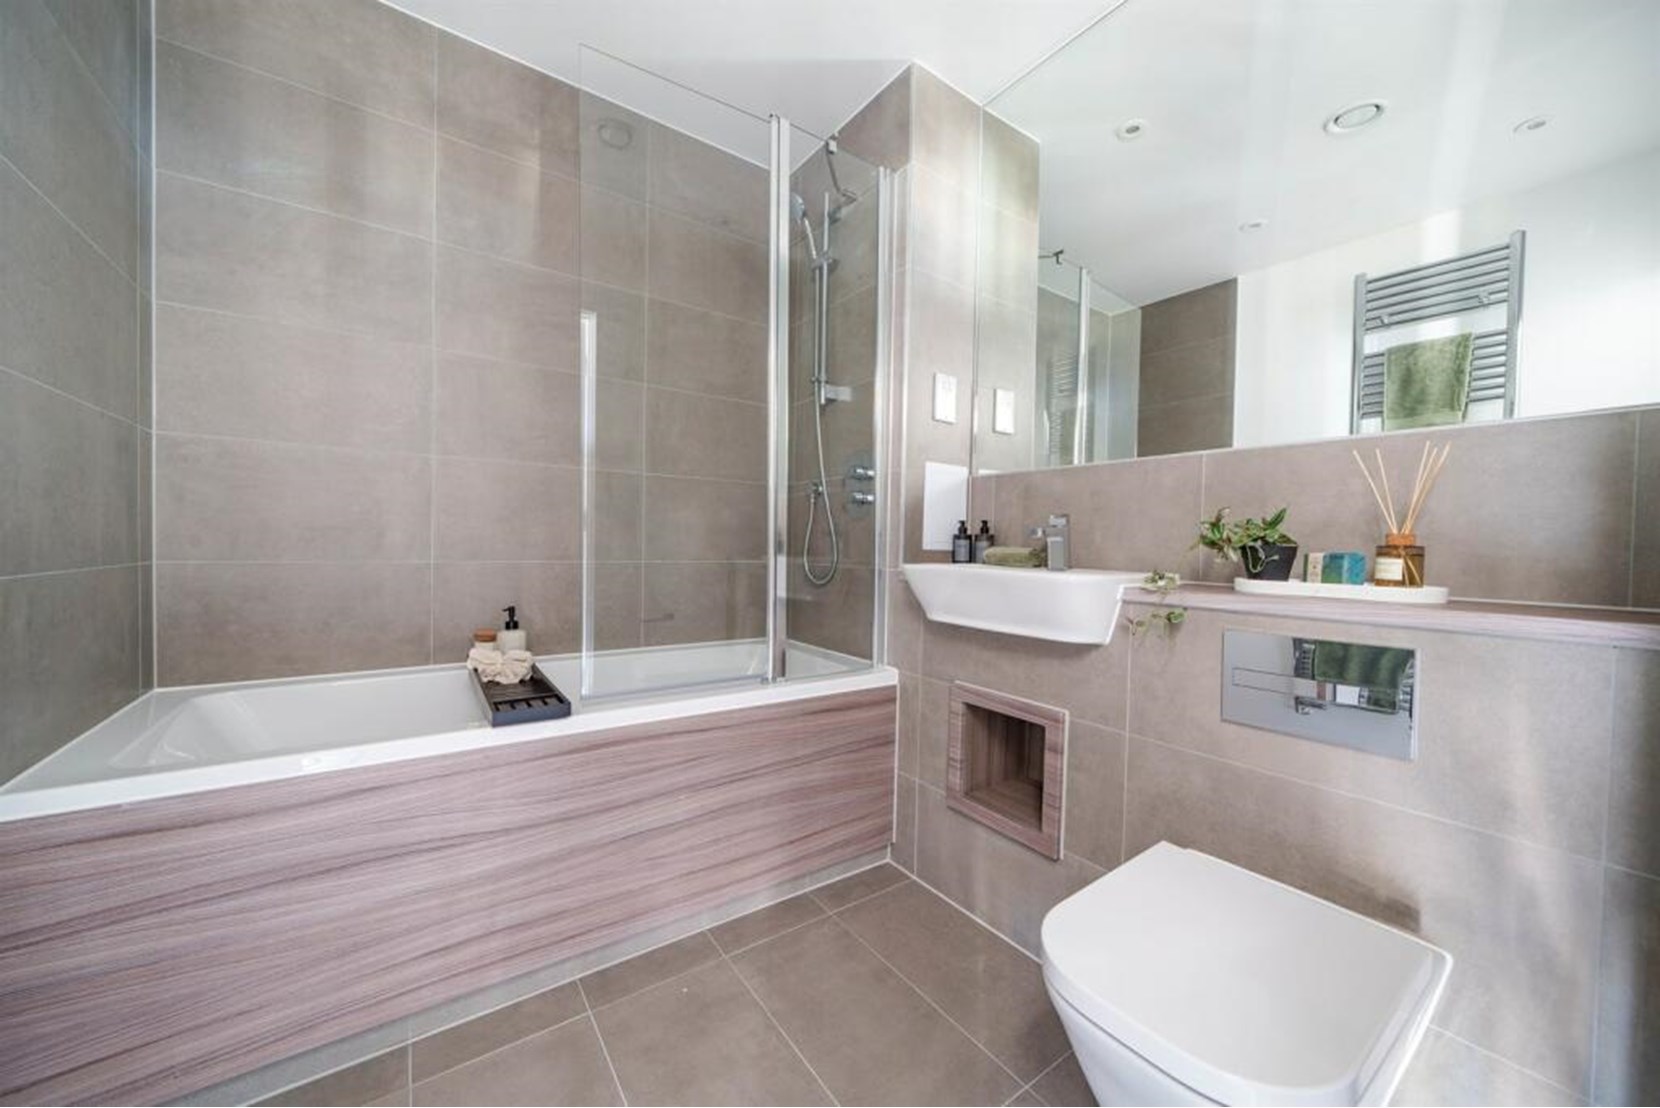 Apartments to Rent by Simple Life London in Ark Soane, Ealing, W3, The Jasper bathroom